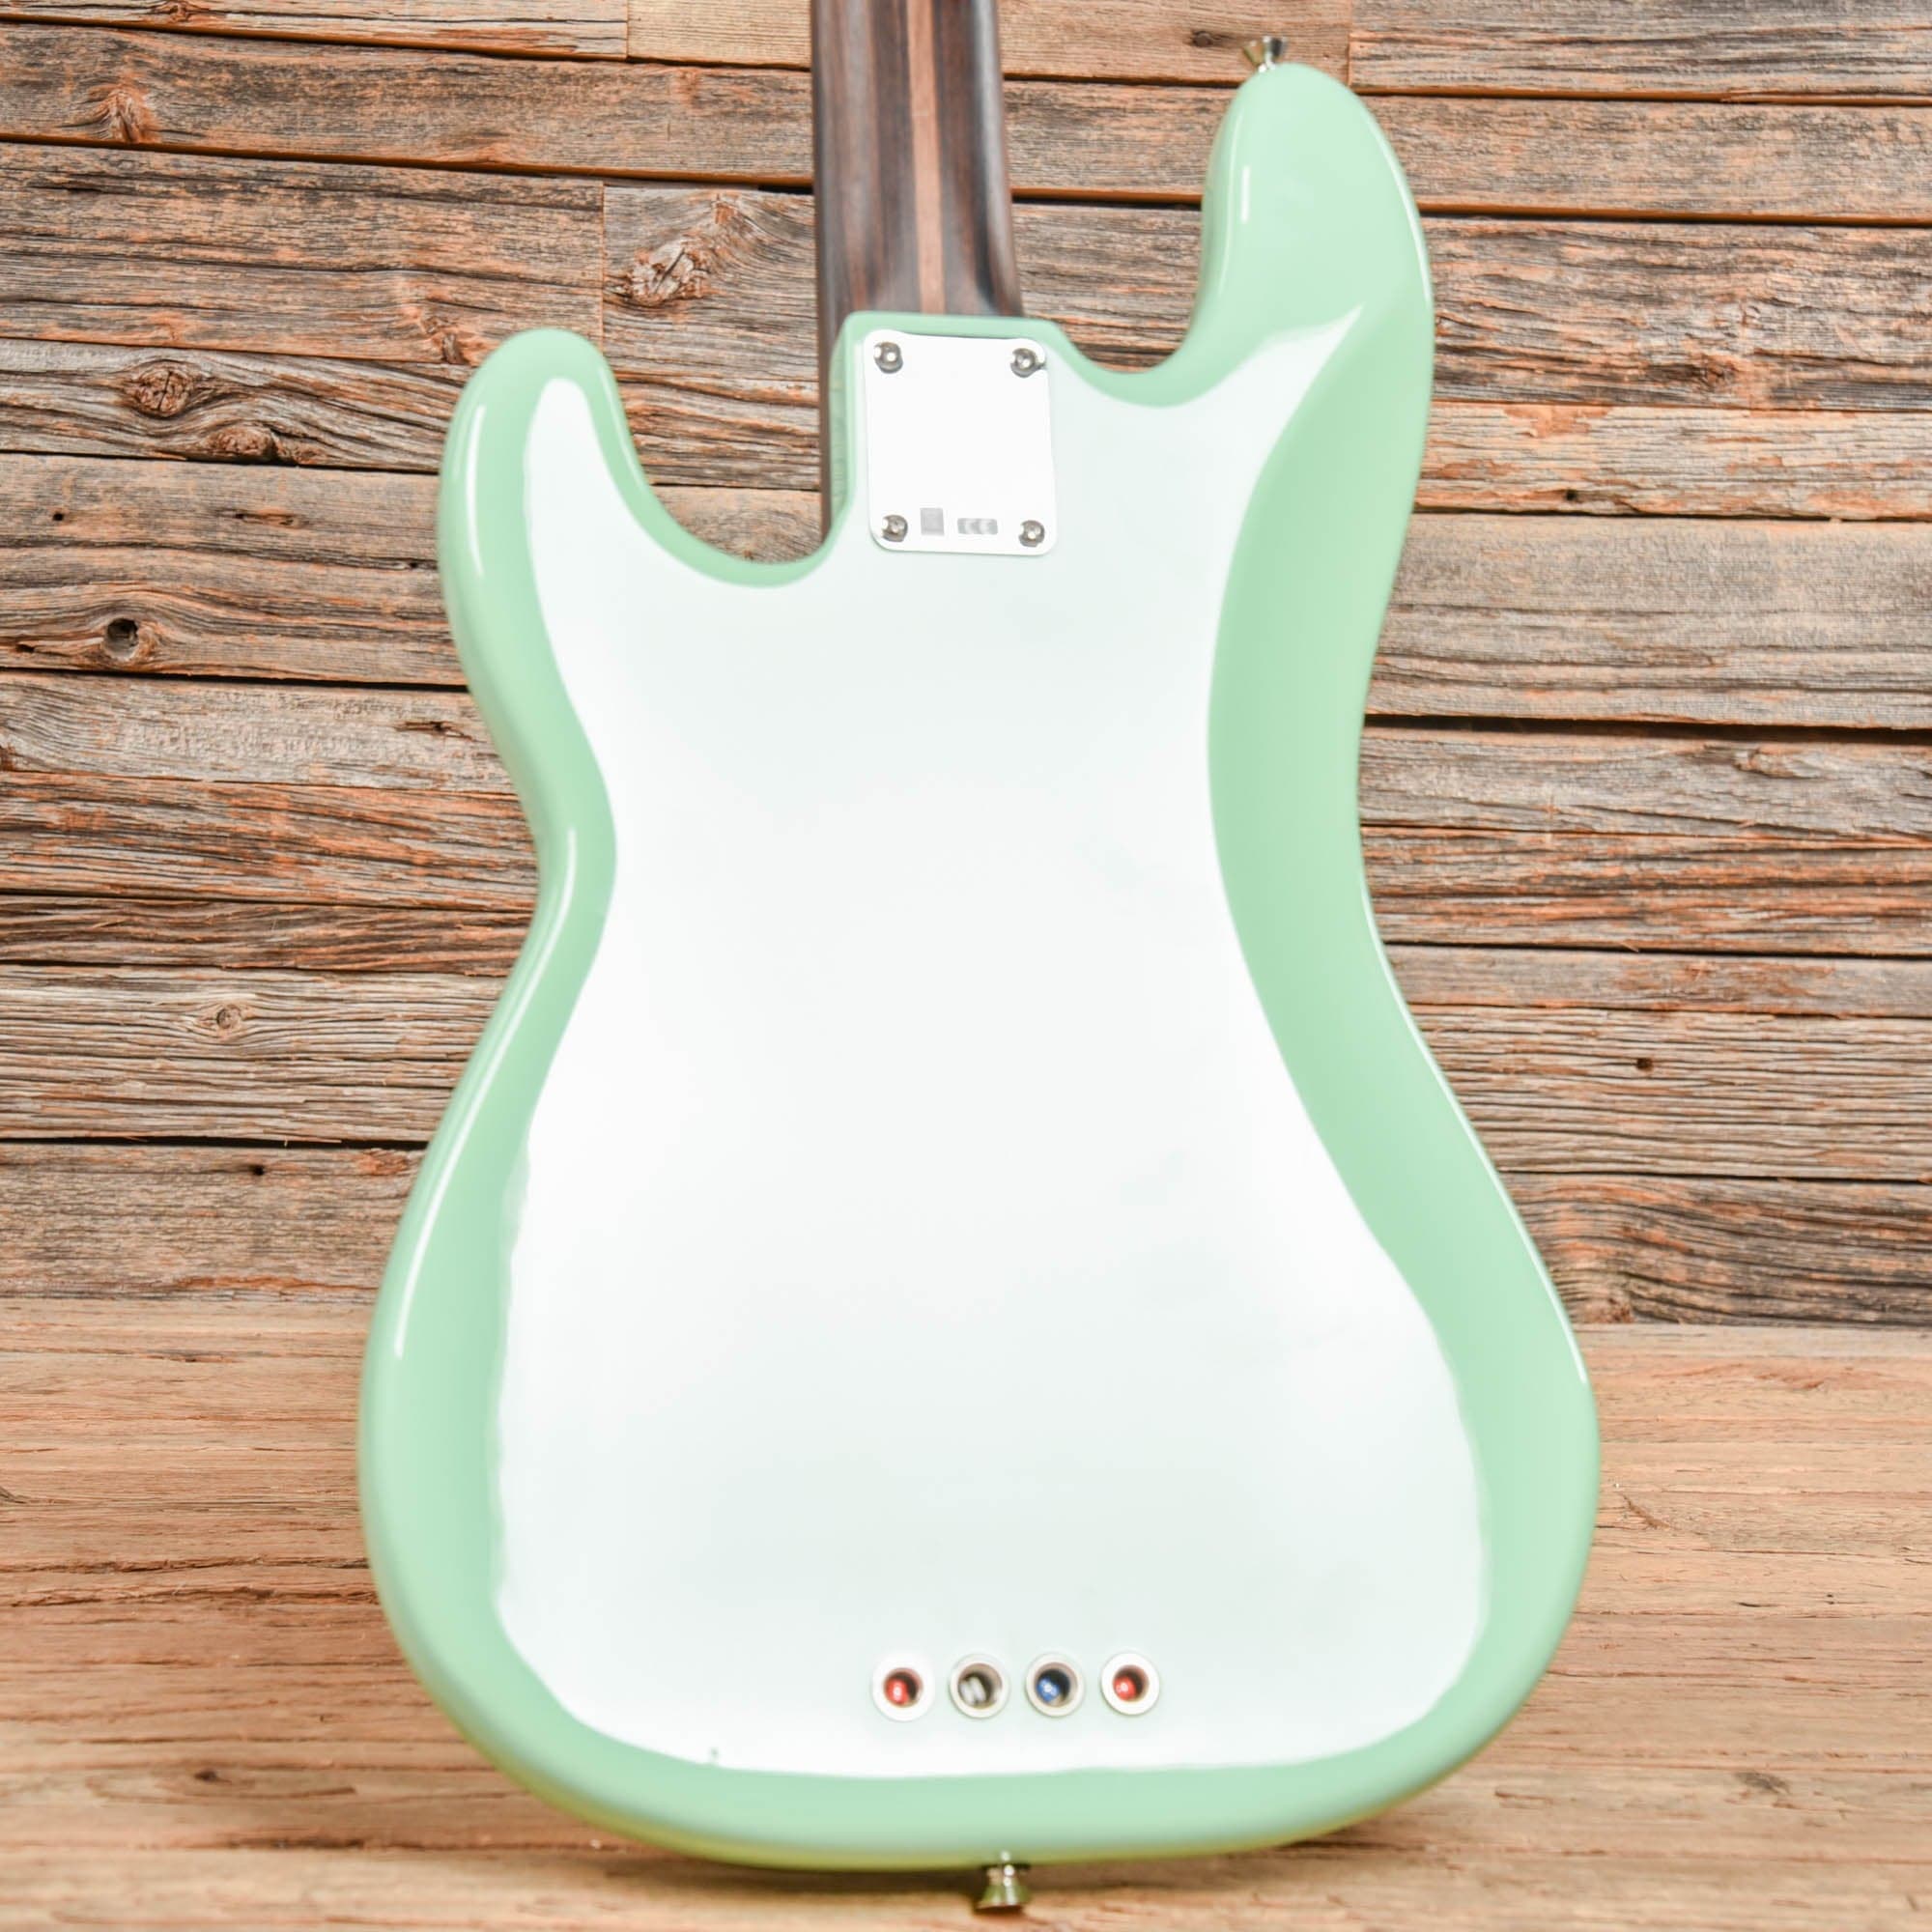 Fender Limited Edition American Professional Precision Bass Surf Green 2019 Bass Guitars / 4-String